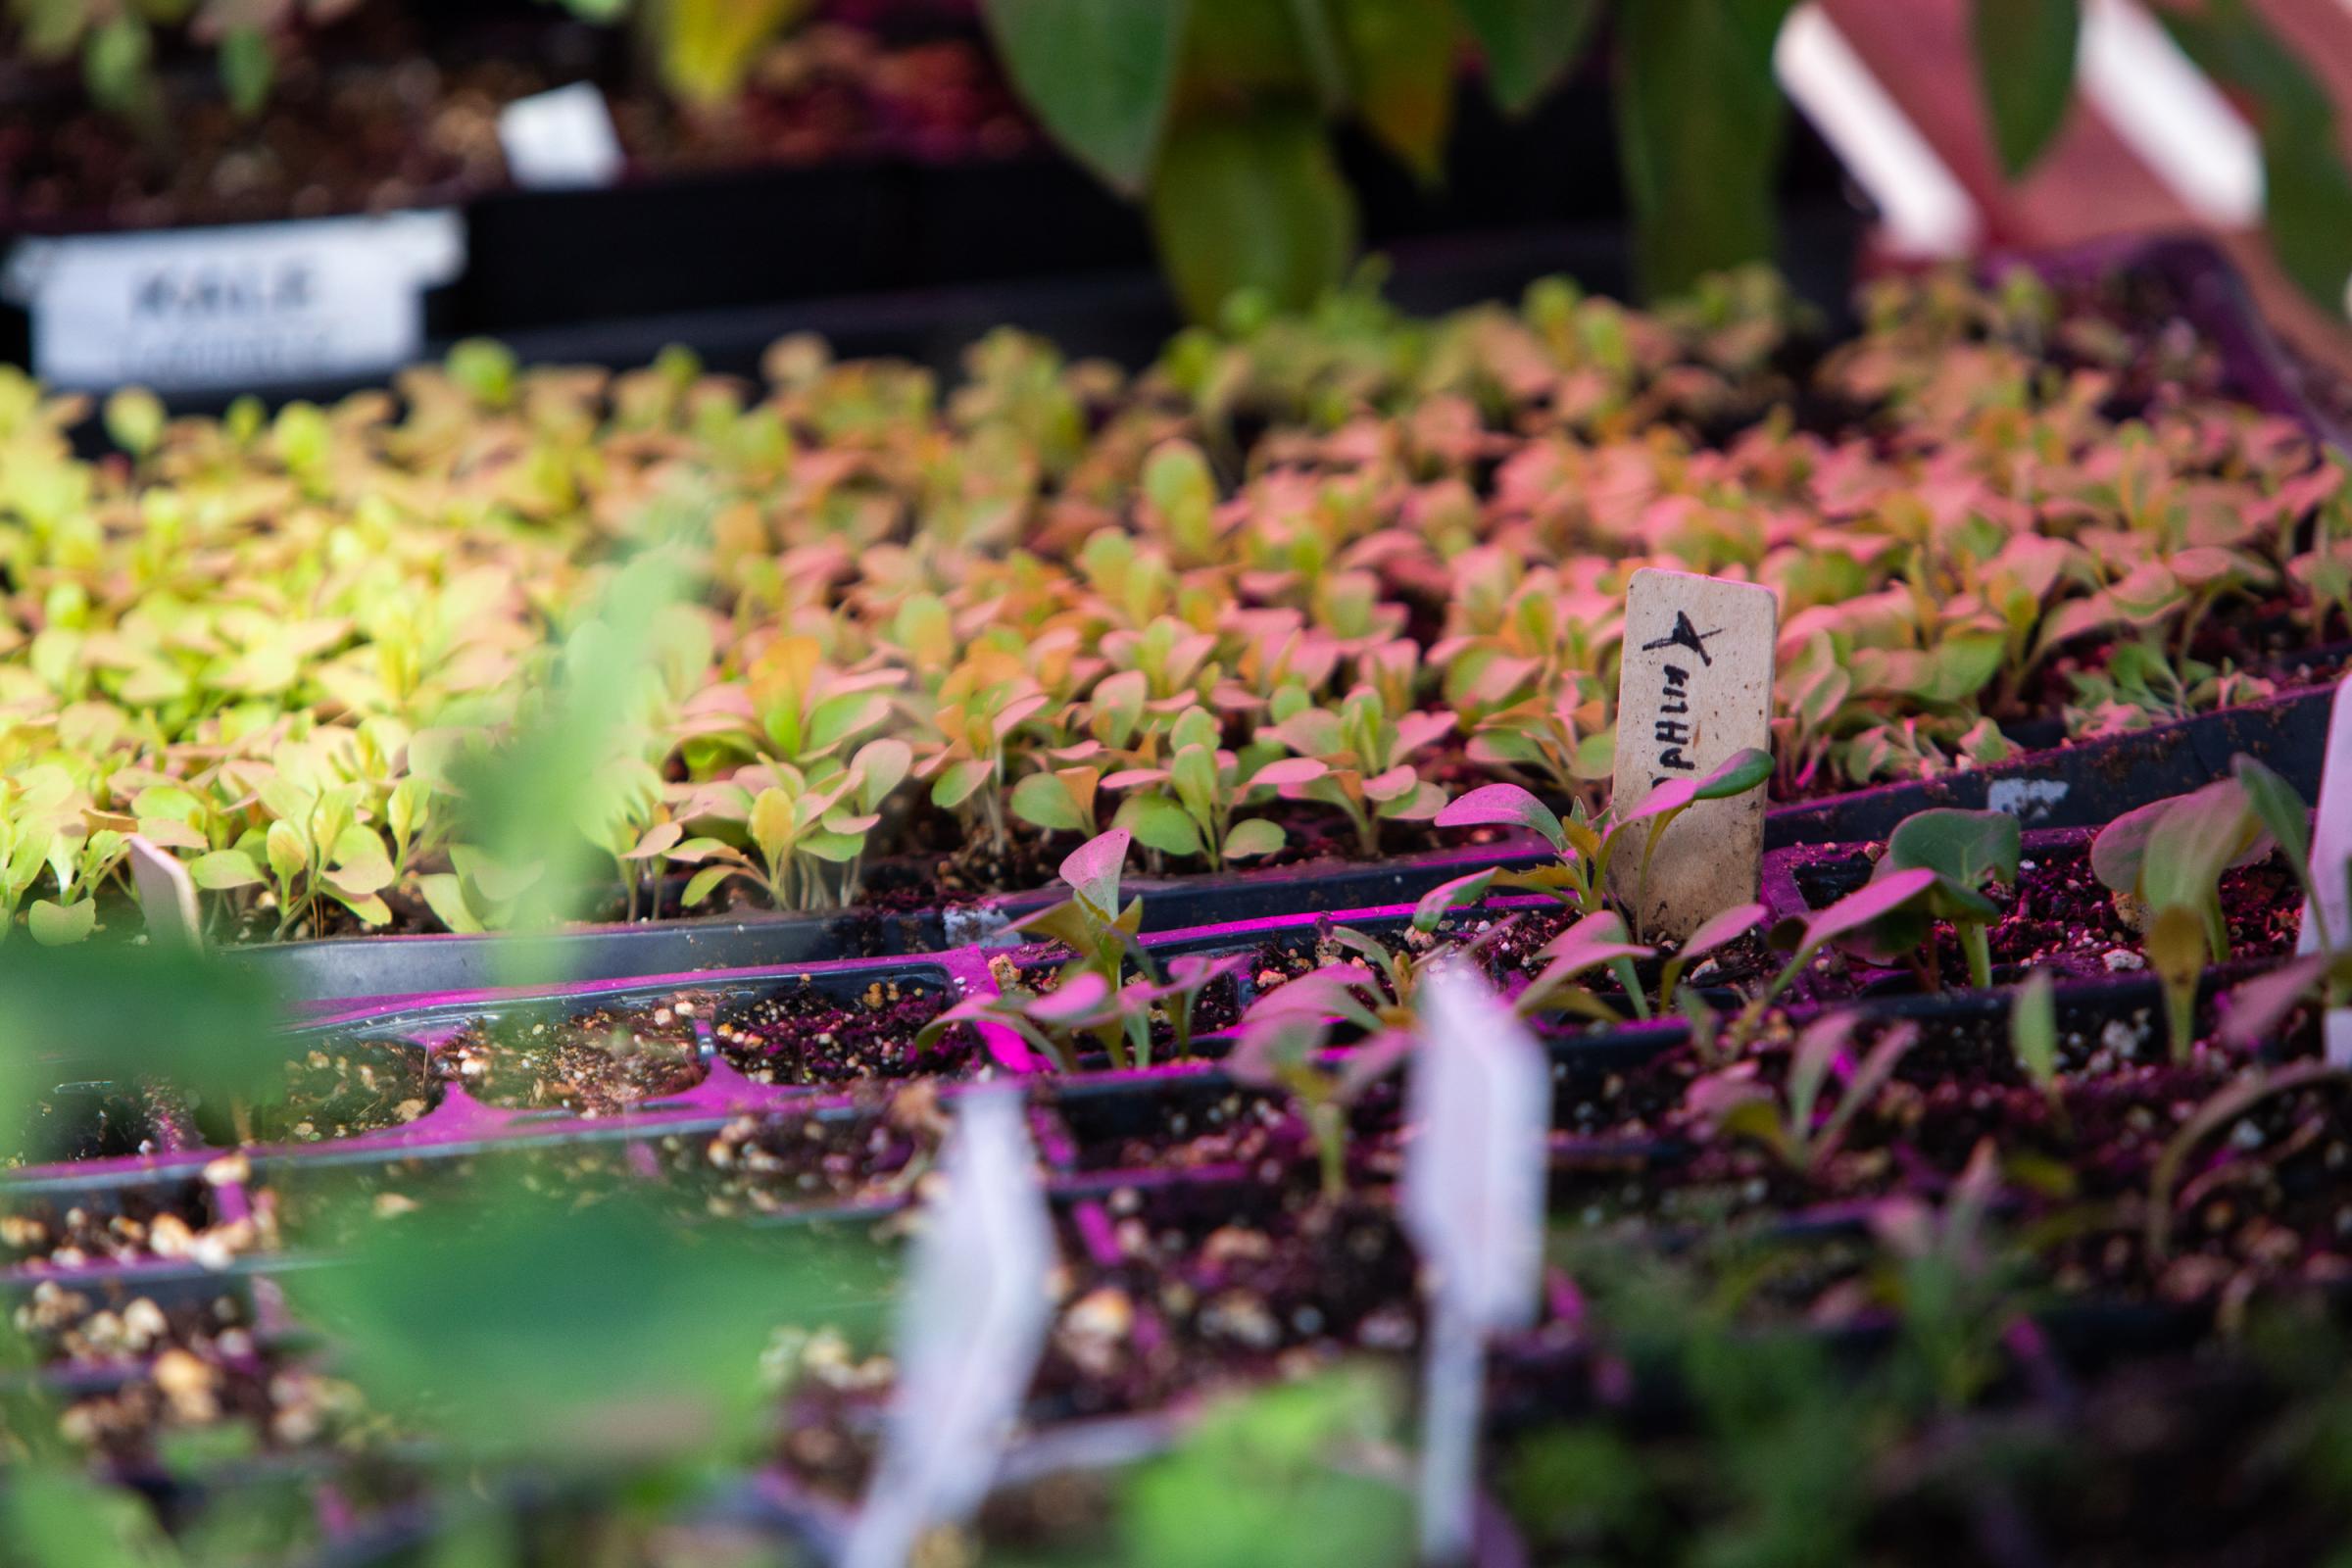 Spence Community Greenhouse - Seedlings spring up in trays under growing lamps at the...